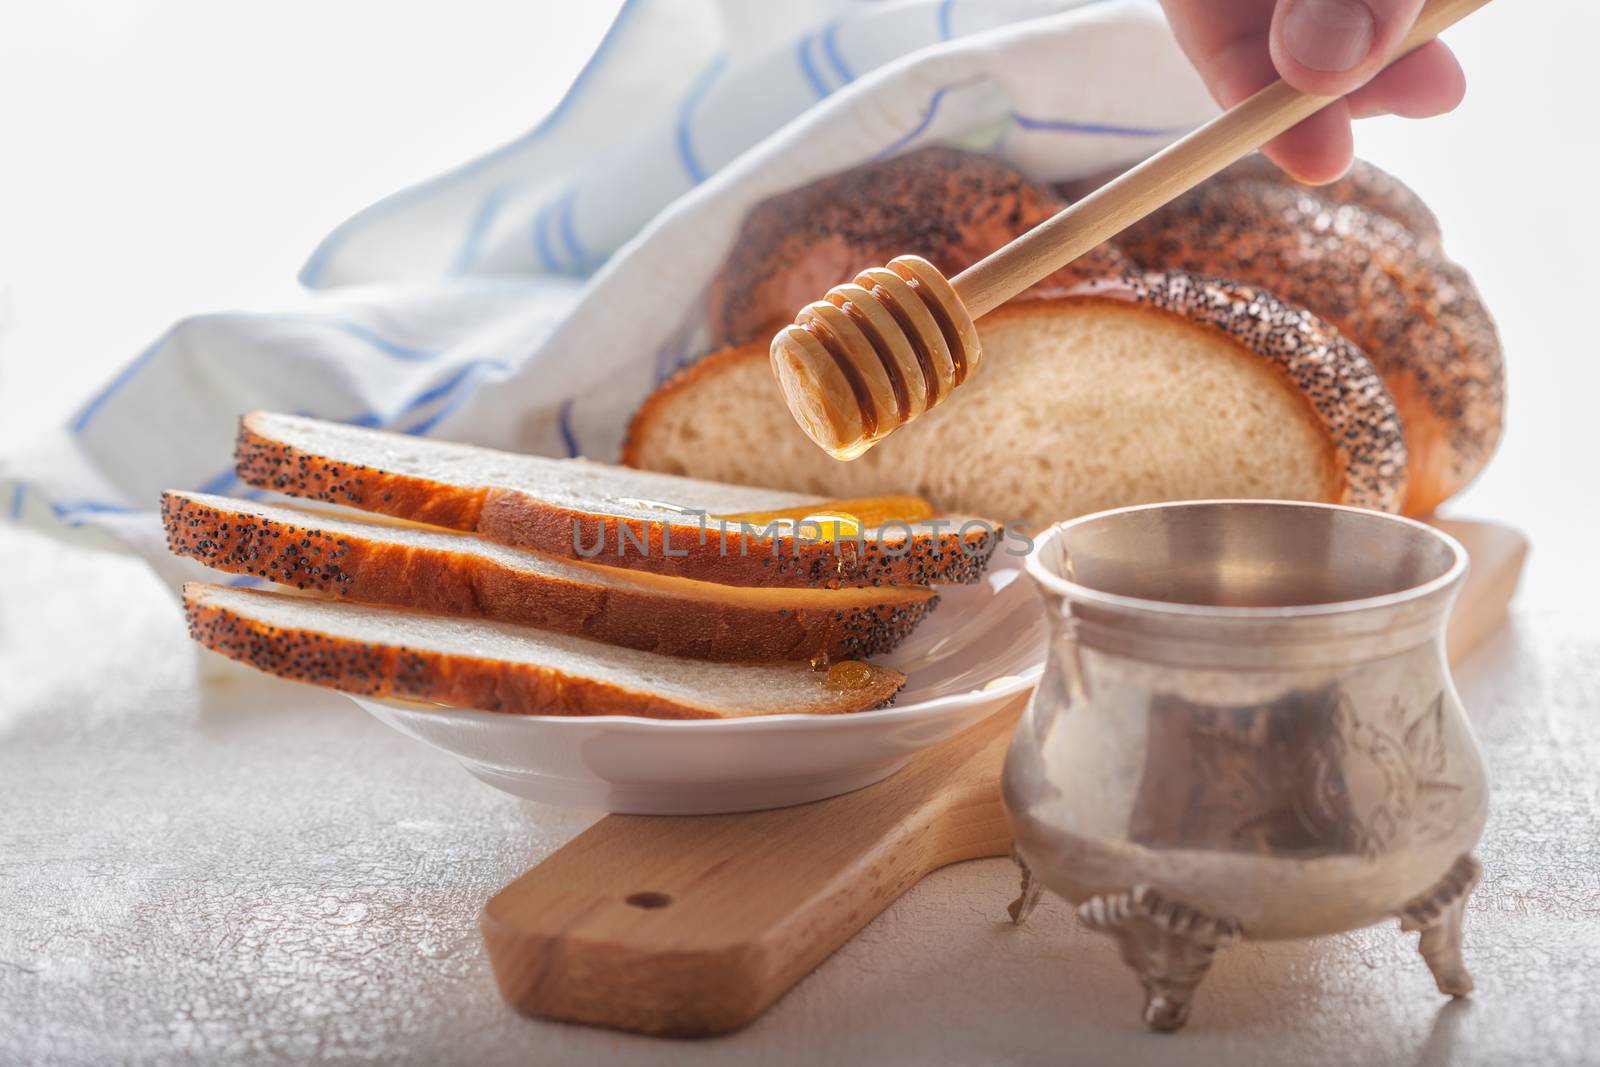 Braided Challah bread and honey  by supercat67